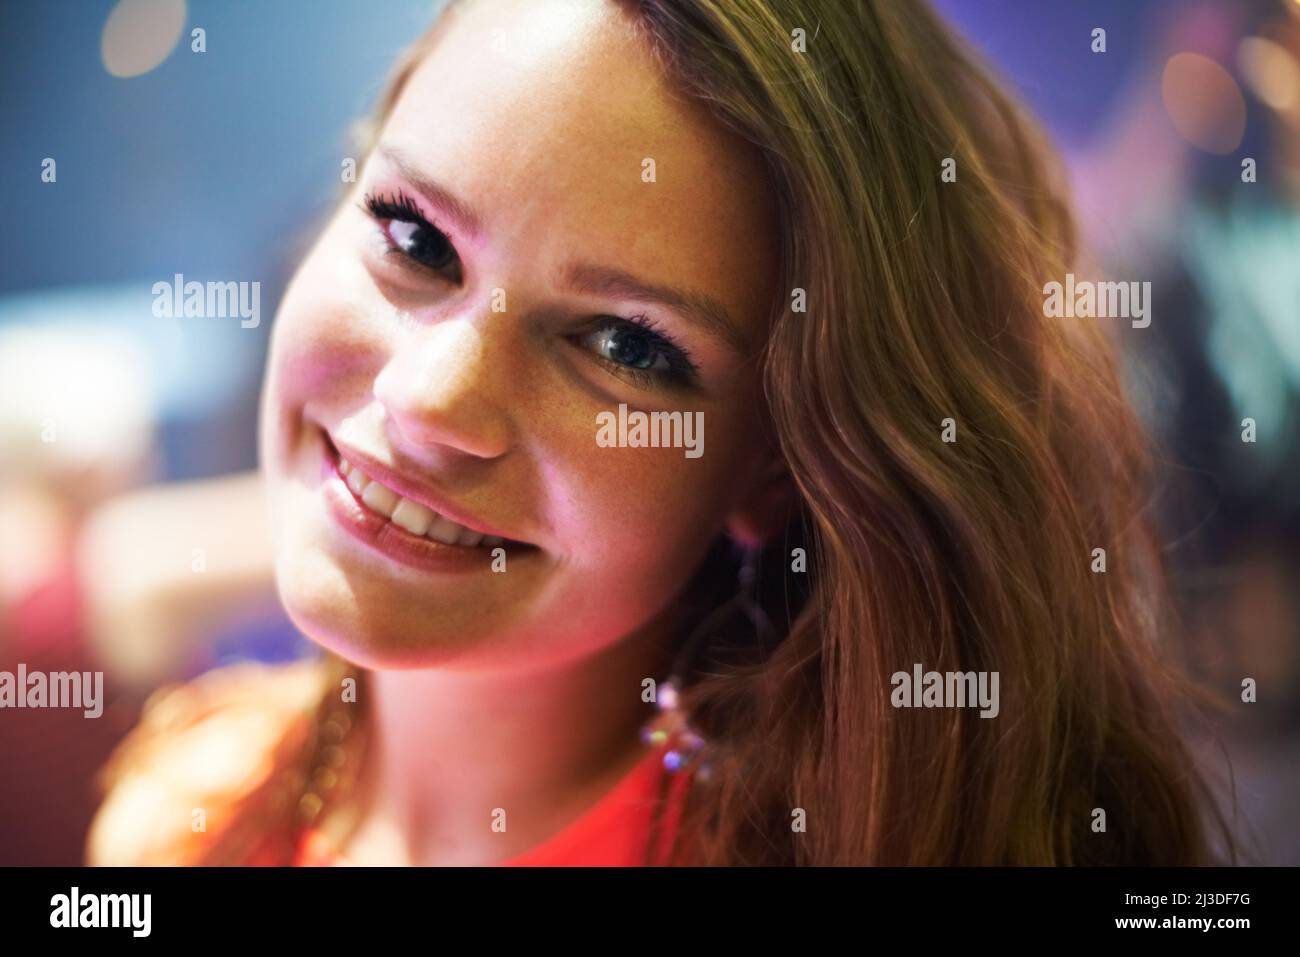 She got such a gorgeous smile. Cropped portrait of an attractive young brunette. Stock Photo